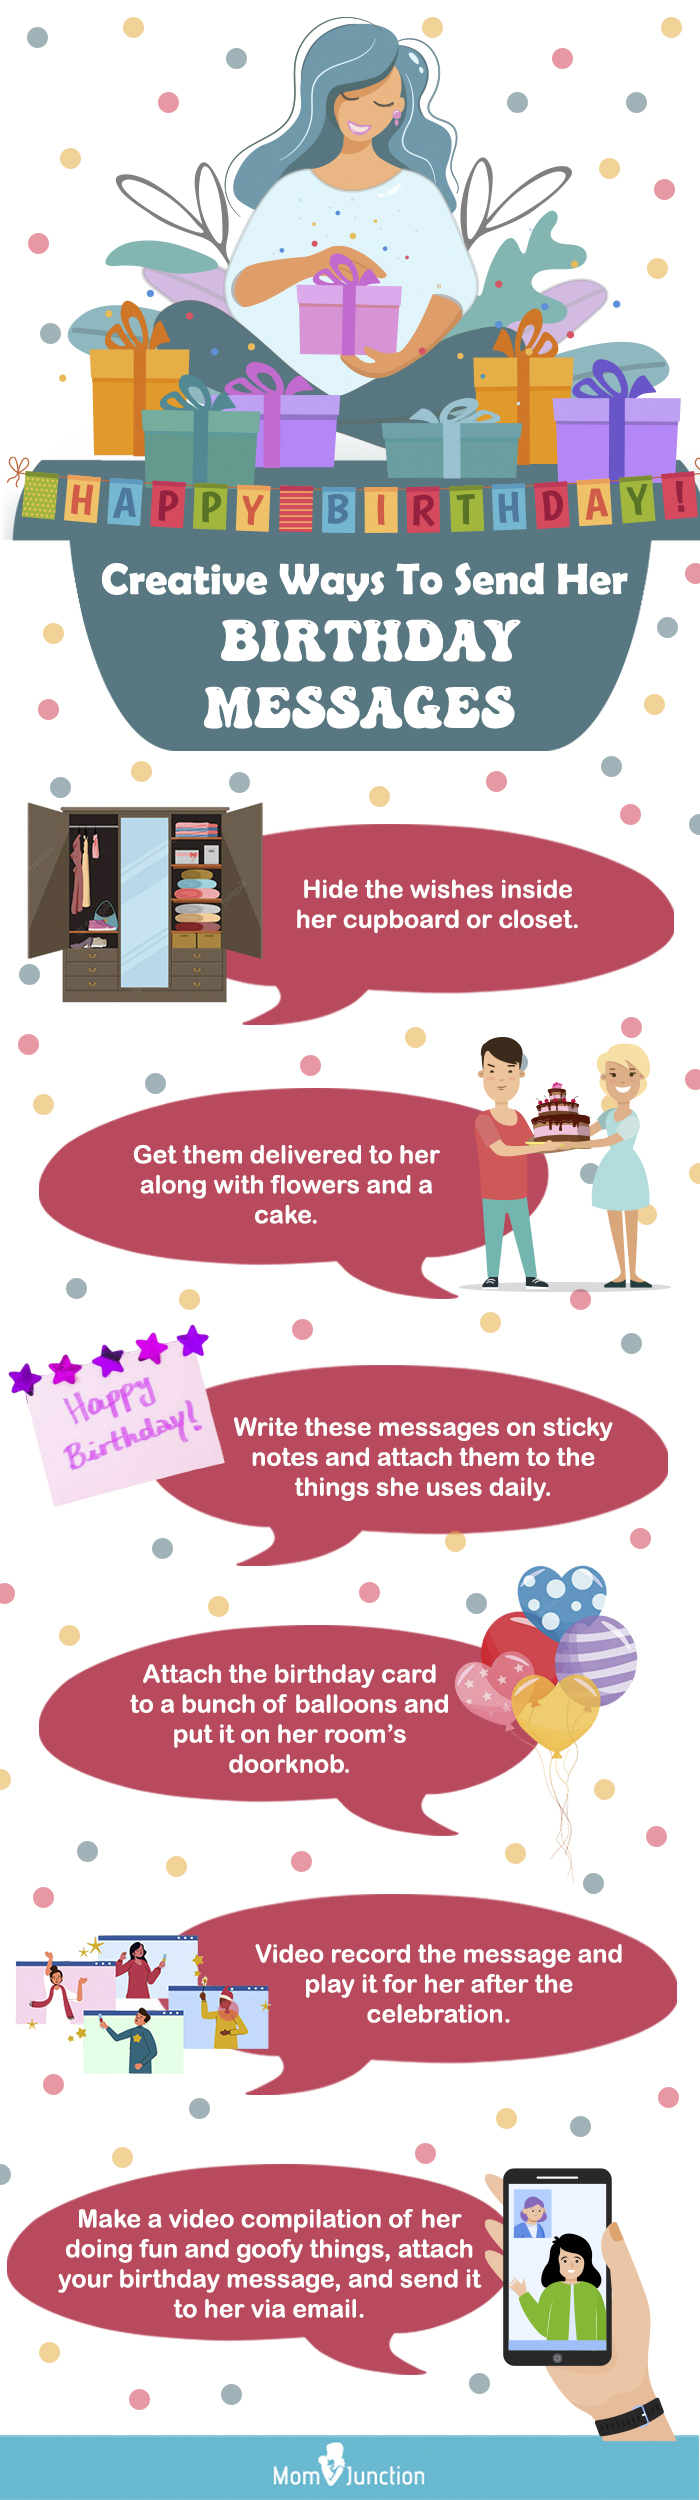 ways to send her birthday messages [infographic]